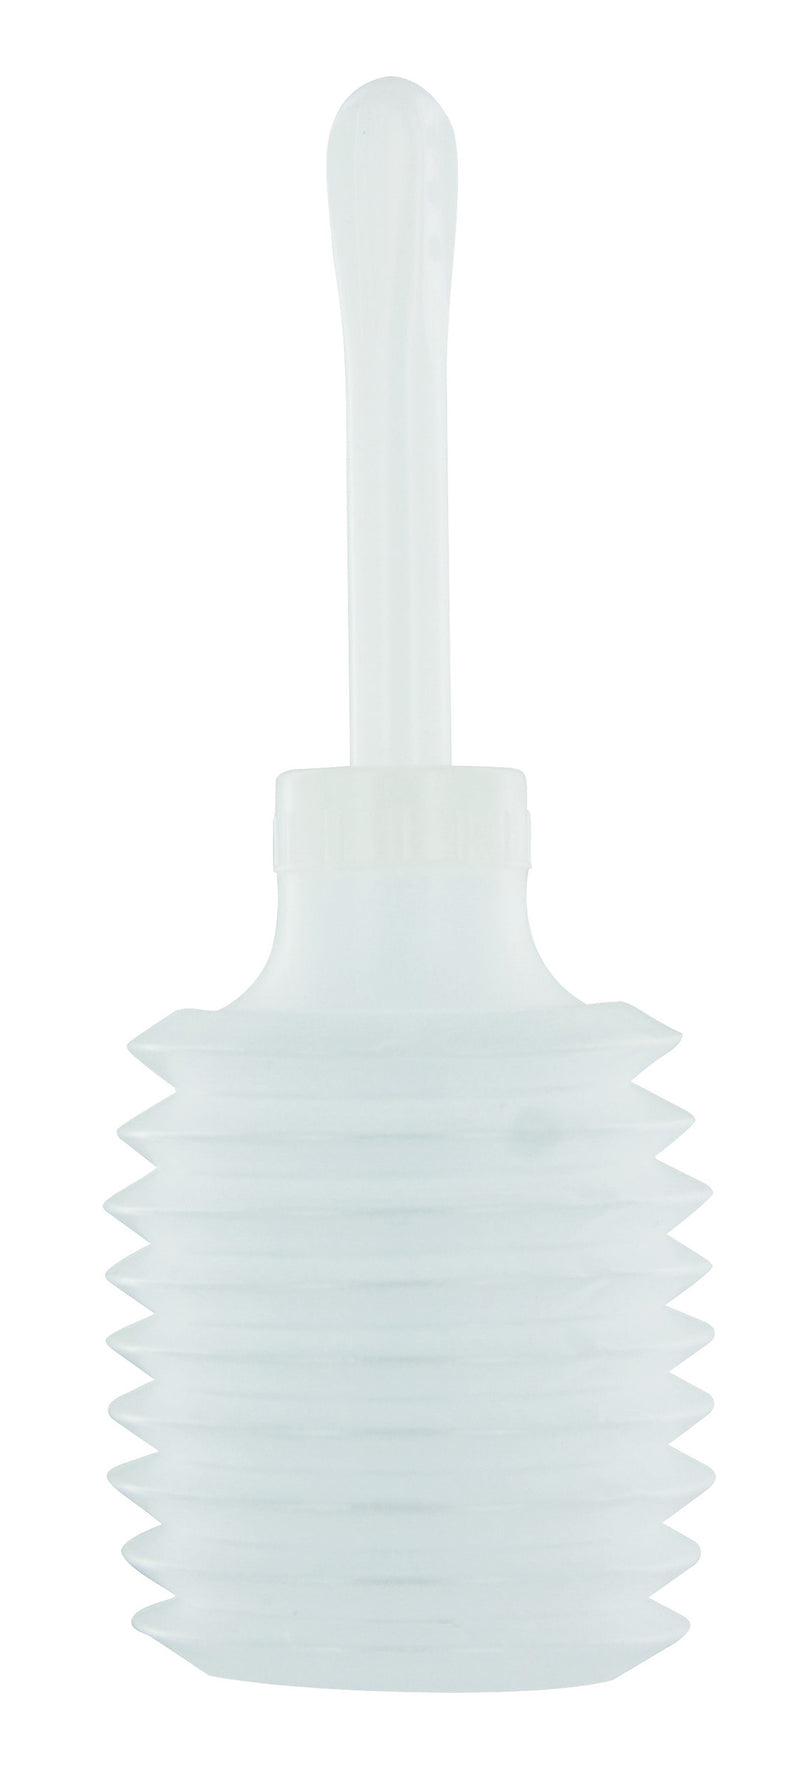 CleanStream Enema Applicator: The Perfect Anal Toy for On-the-Go Freshness and Satisfaction!